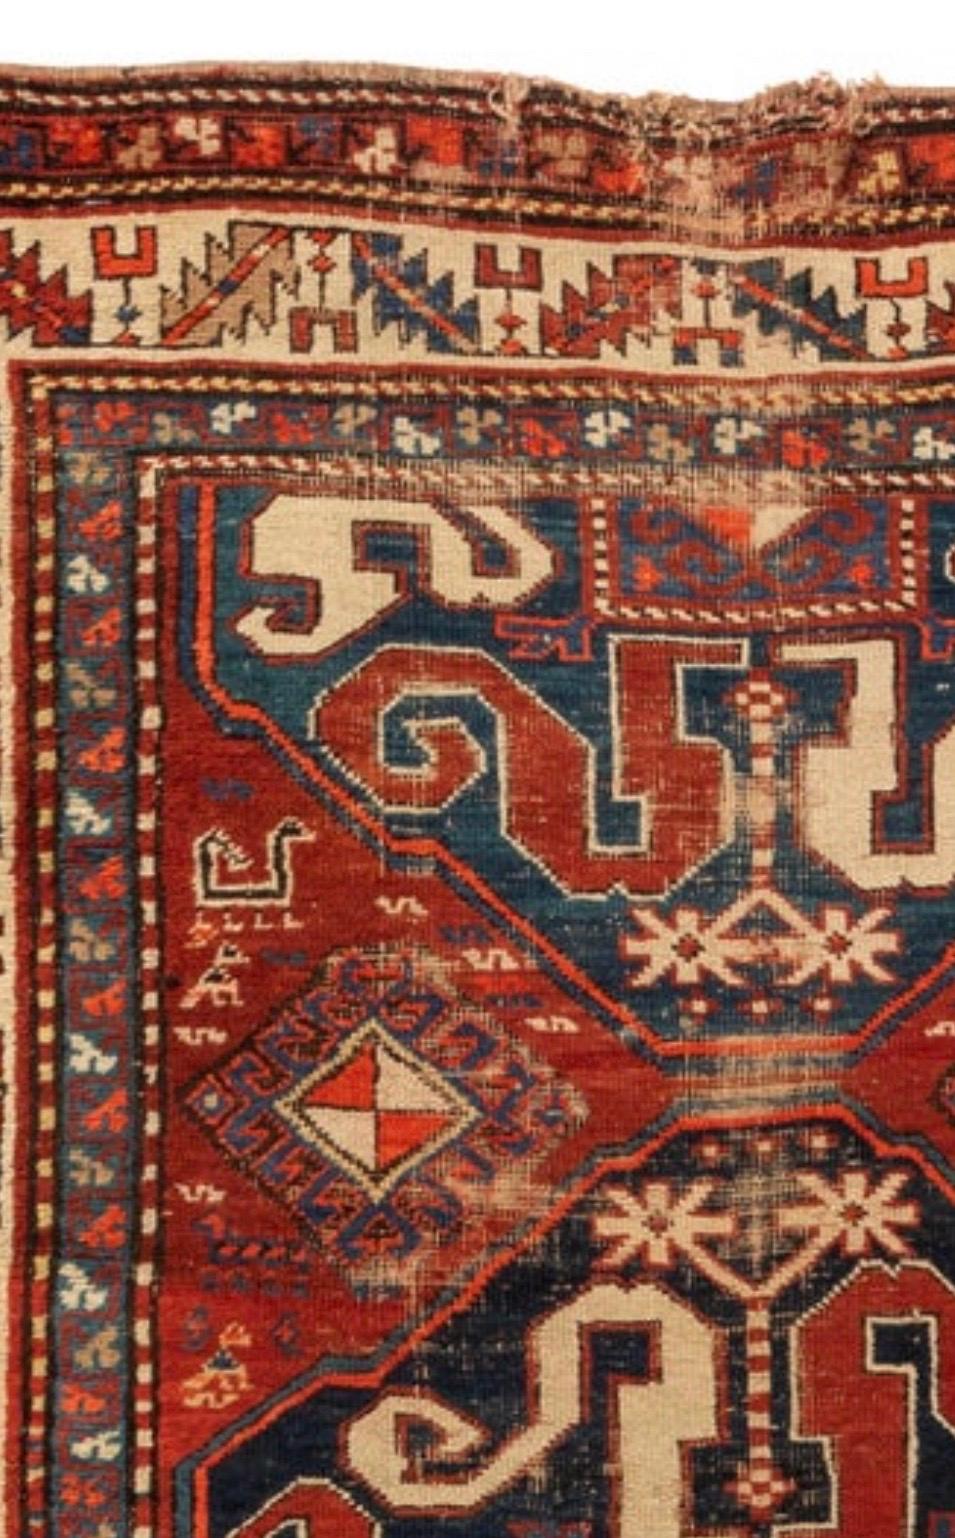 This is a well-worn hand knotted antique red ivory and navy blue distressed tribal Caucasian Kazak rug circa 1880s measuring 4.3 x 7.7 ft.

 